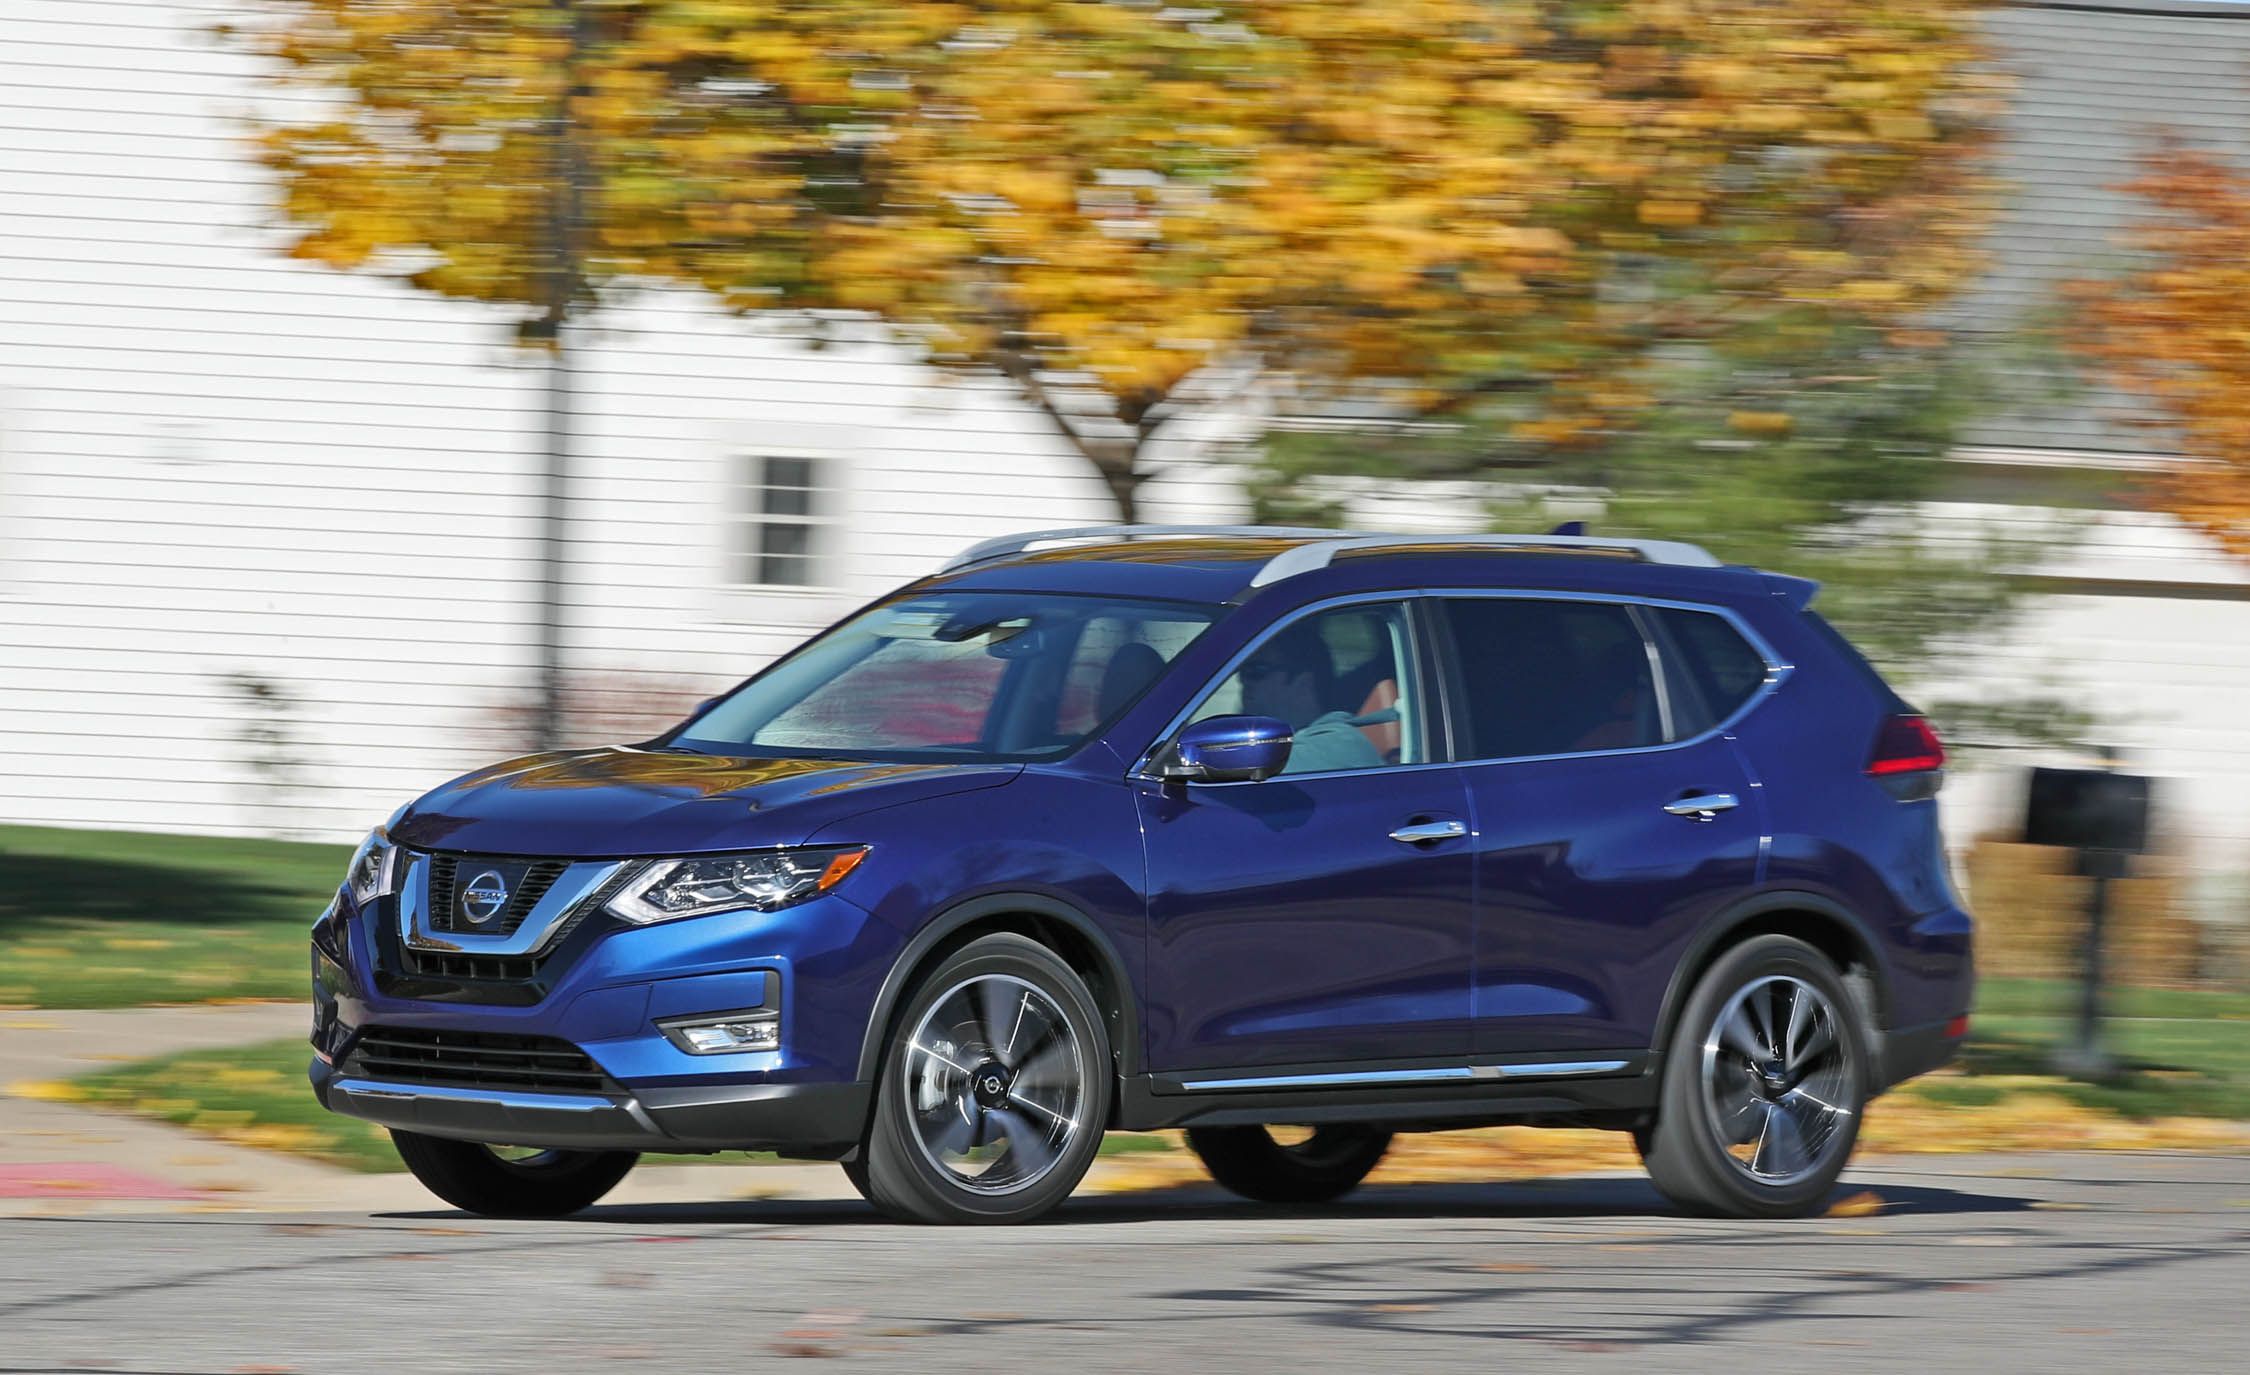 2017 Nissan Rogue Test Drive Preview (View 4 of 37)